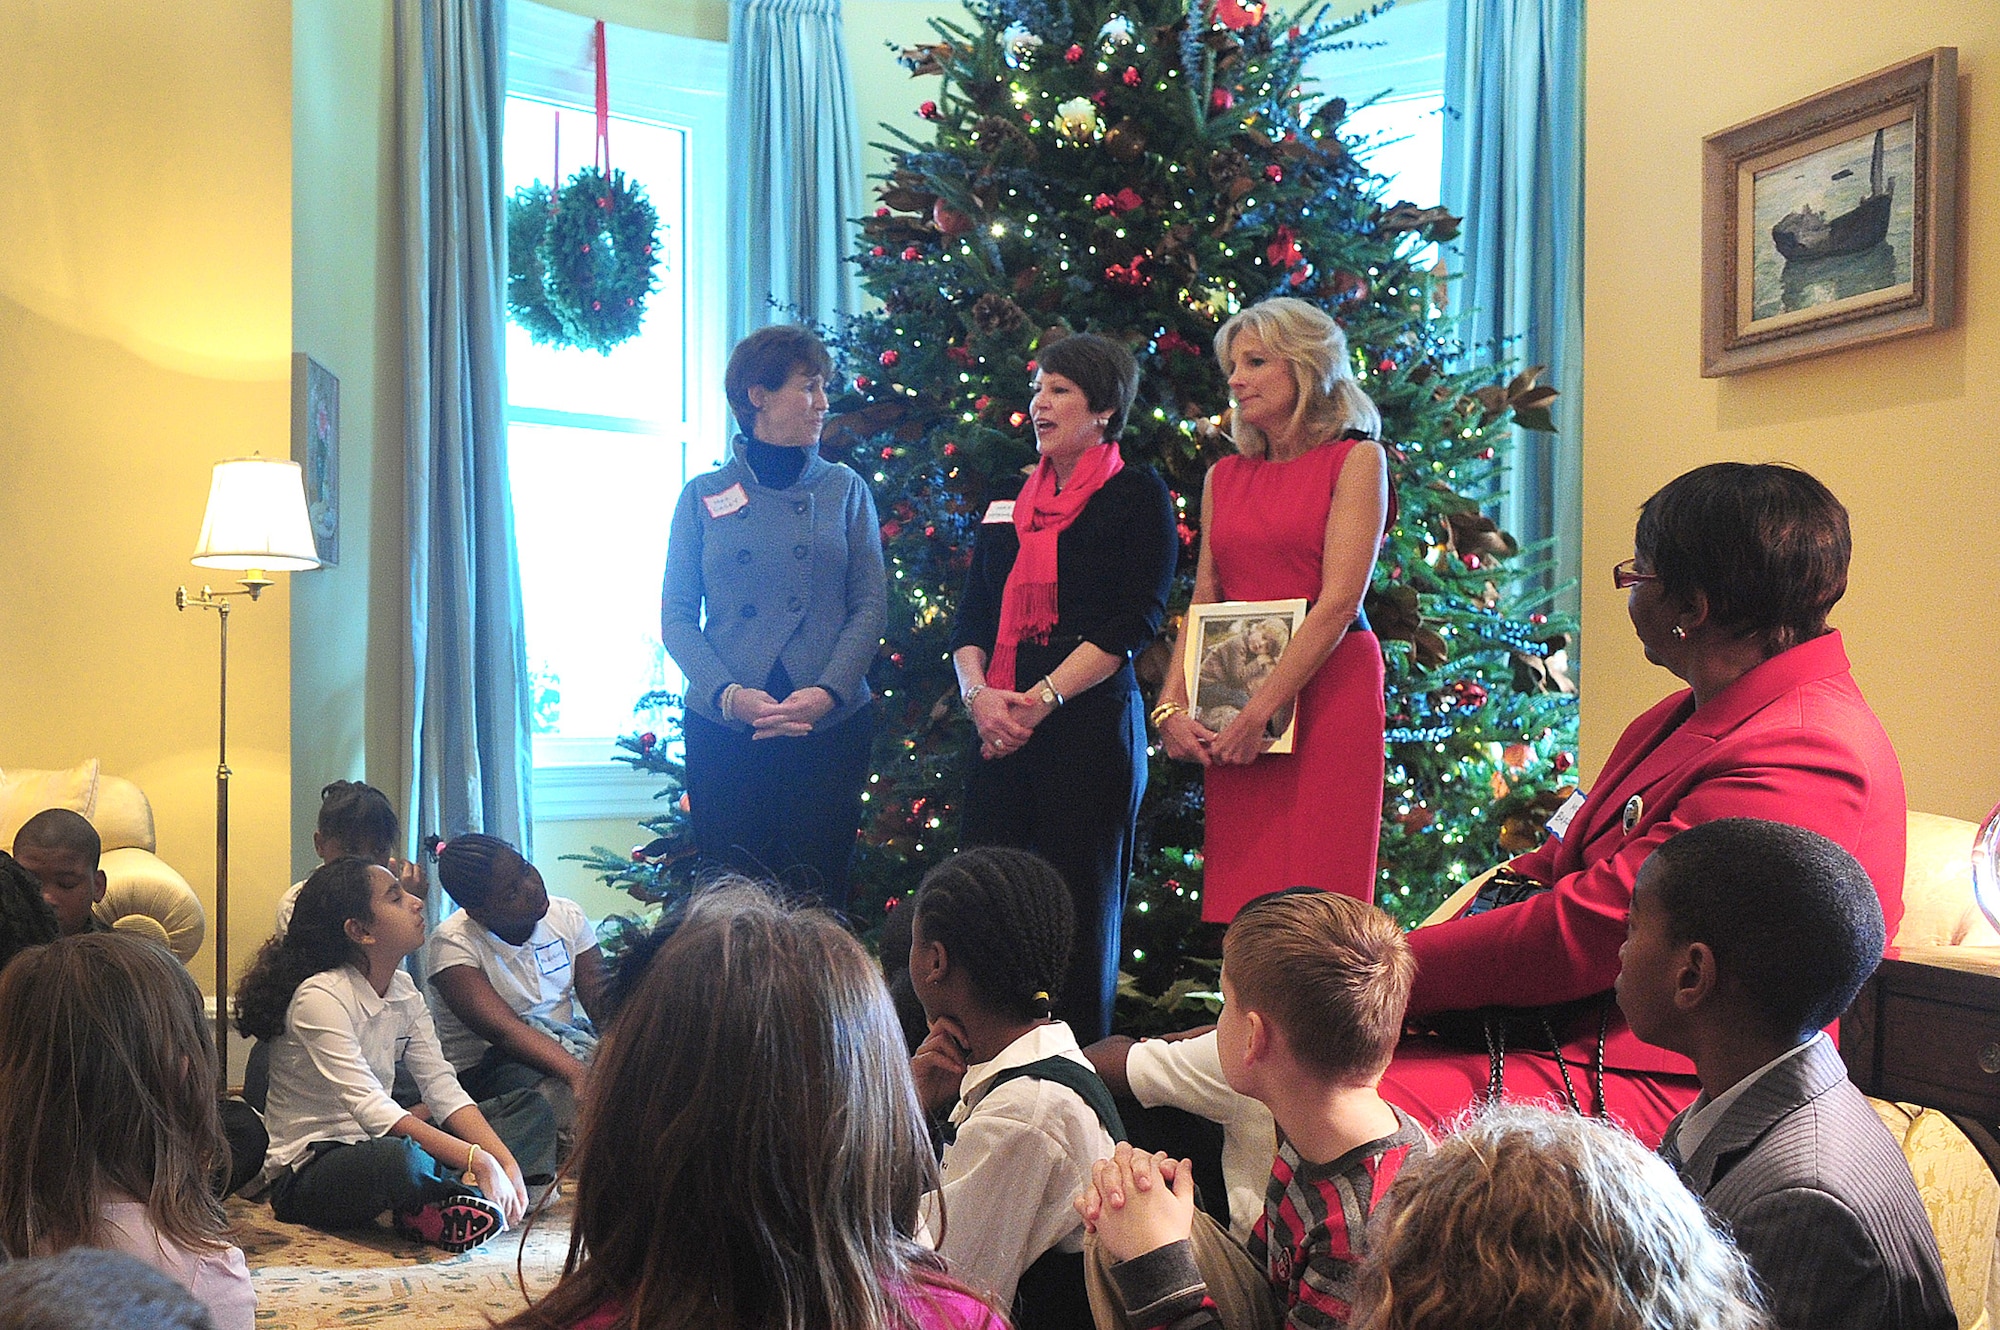 Cheryl McKinley (center) talks to children of National Guard families invited to take part in a holiday tree-trimming event Dec. 1, 2010, at the official residence of the vice president. During the event, children made cards for servicemembers and ornaments that will be on display at the residence throughout the holiday season. Standing with Mrs. McKinley are Dr. Jill Biden (right), the wife of Vice President Joe Biden; and Shelia Casey, the wife of Army chief of staff Gen. George W. Casey Jr. Mrs. McKinley is the wife of Air Force Gen. Craig R. McKinley, the chief of the National Guard Bureau. (U.S. Army photo/Sgt. 1st Class Jon Soucy)